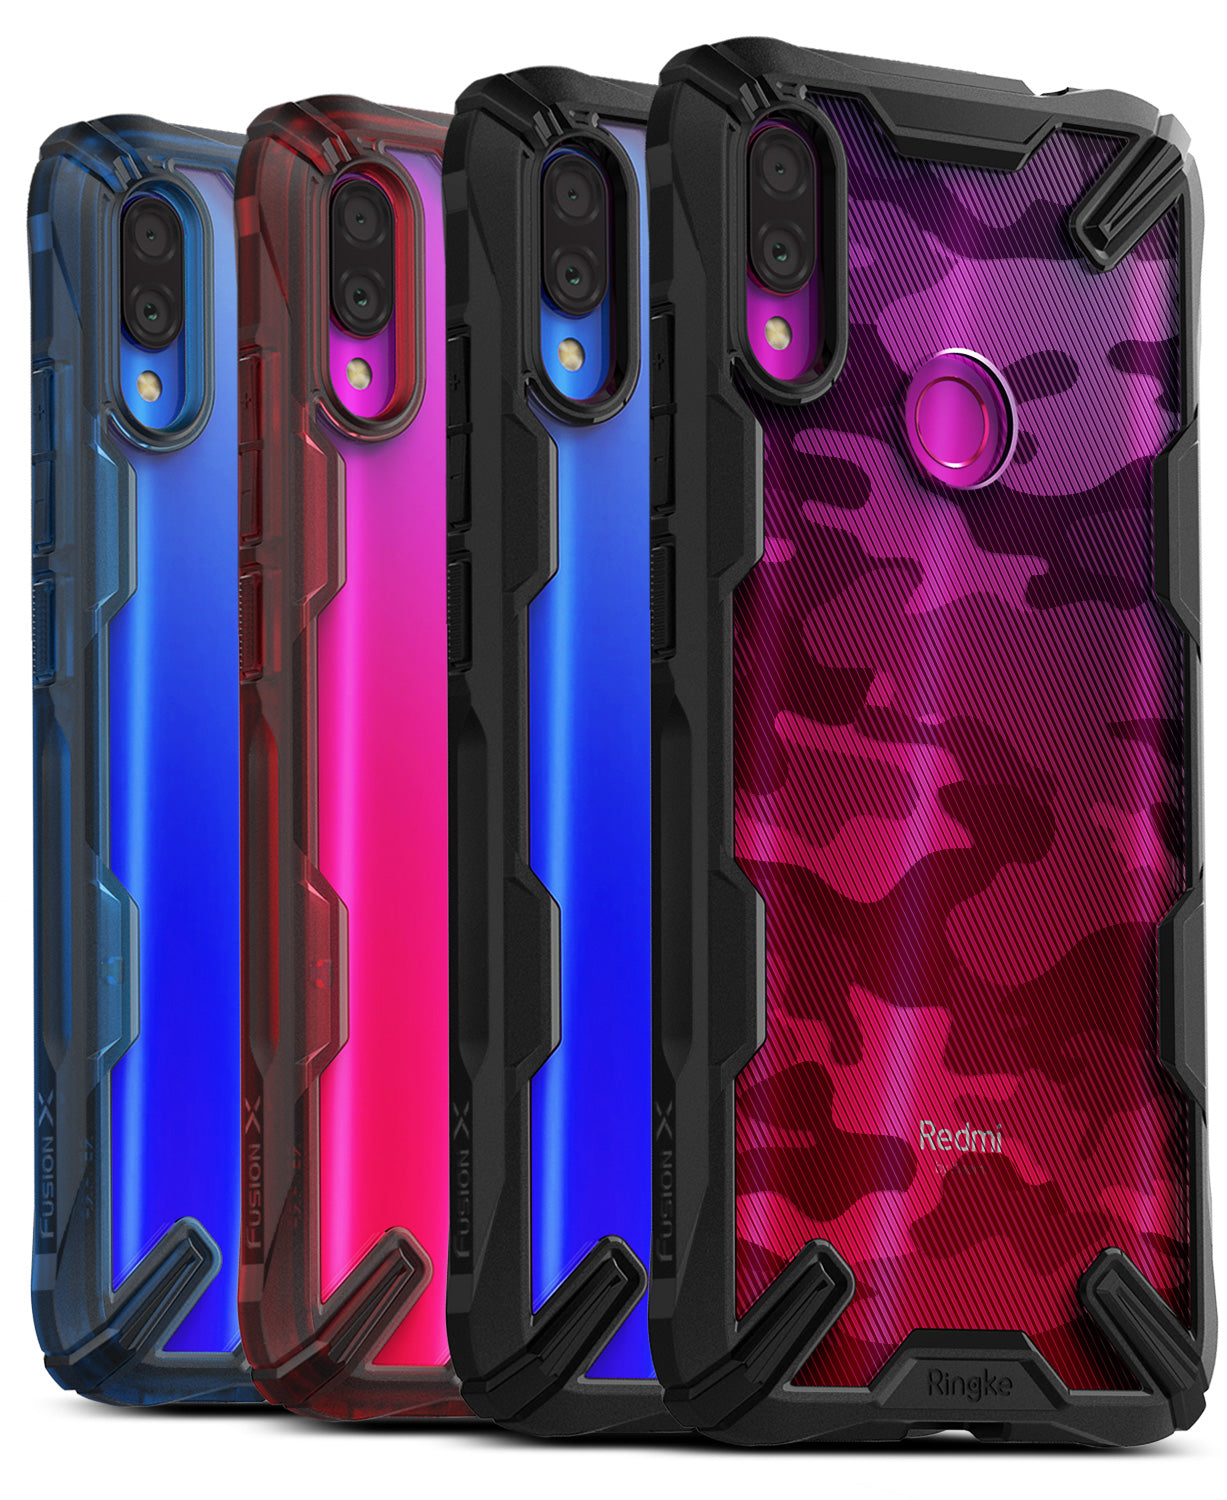 Redmi Note 7 / 7 Pro Case | Fusion-X - Ringke Official Store